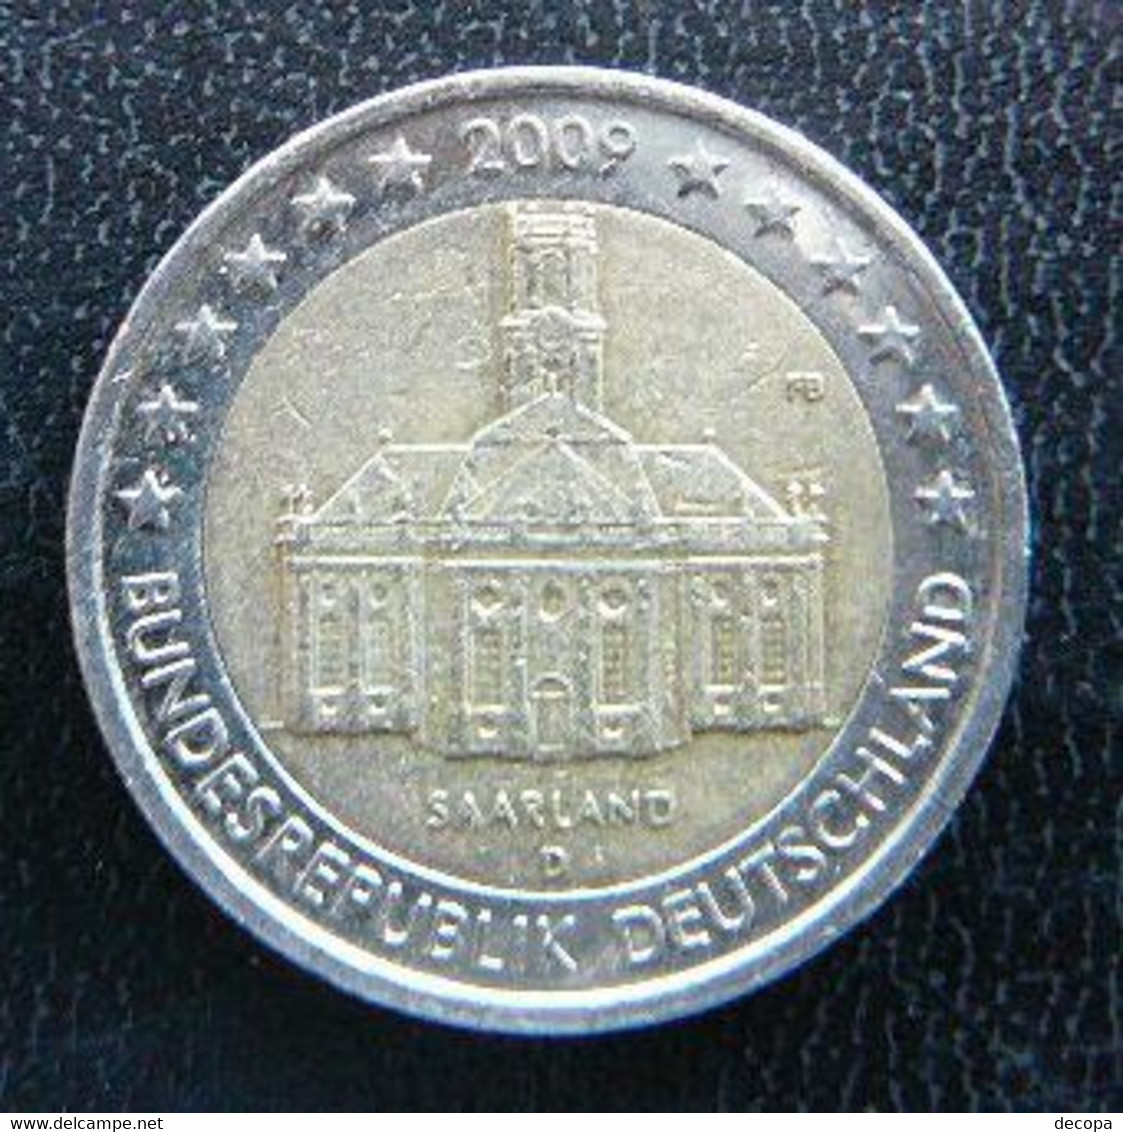 Germany - Allemagne - Duitsland   2 EURO 2009 D      Speciale Uitgave - Commemorative - Germany